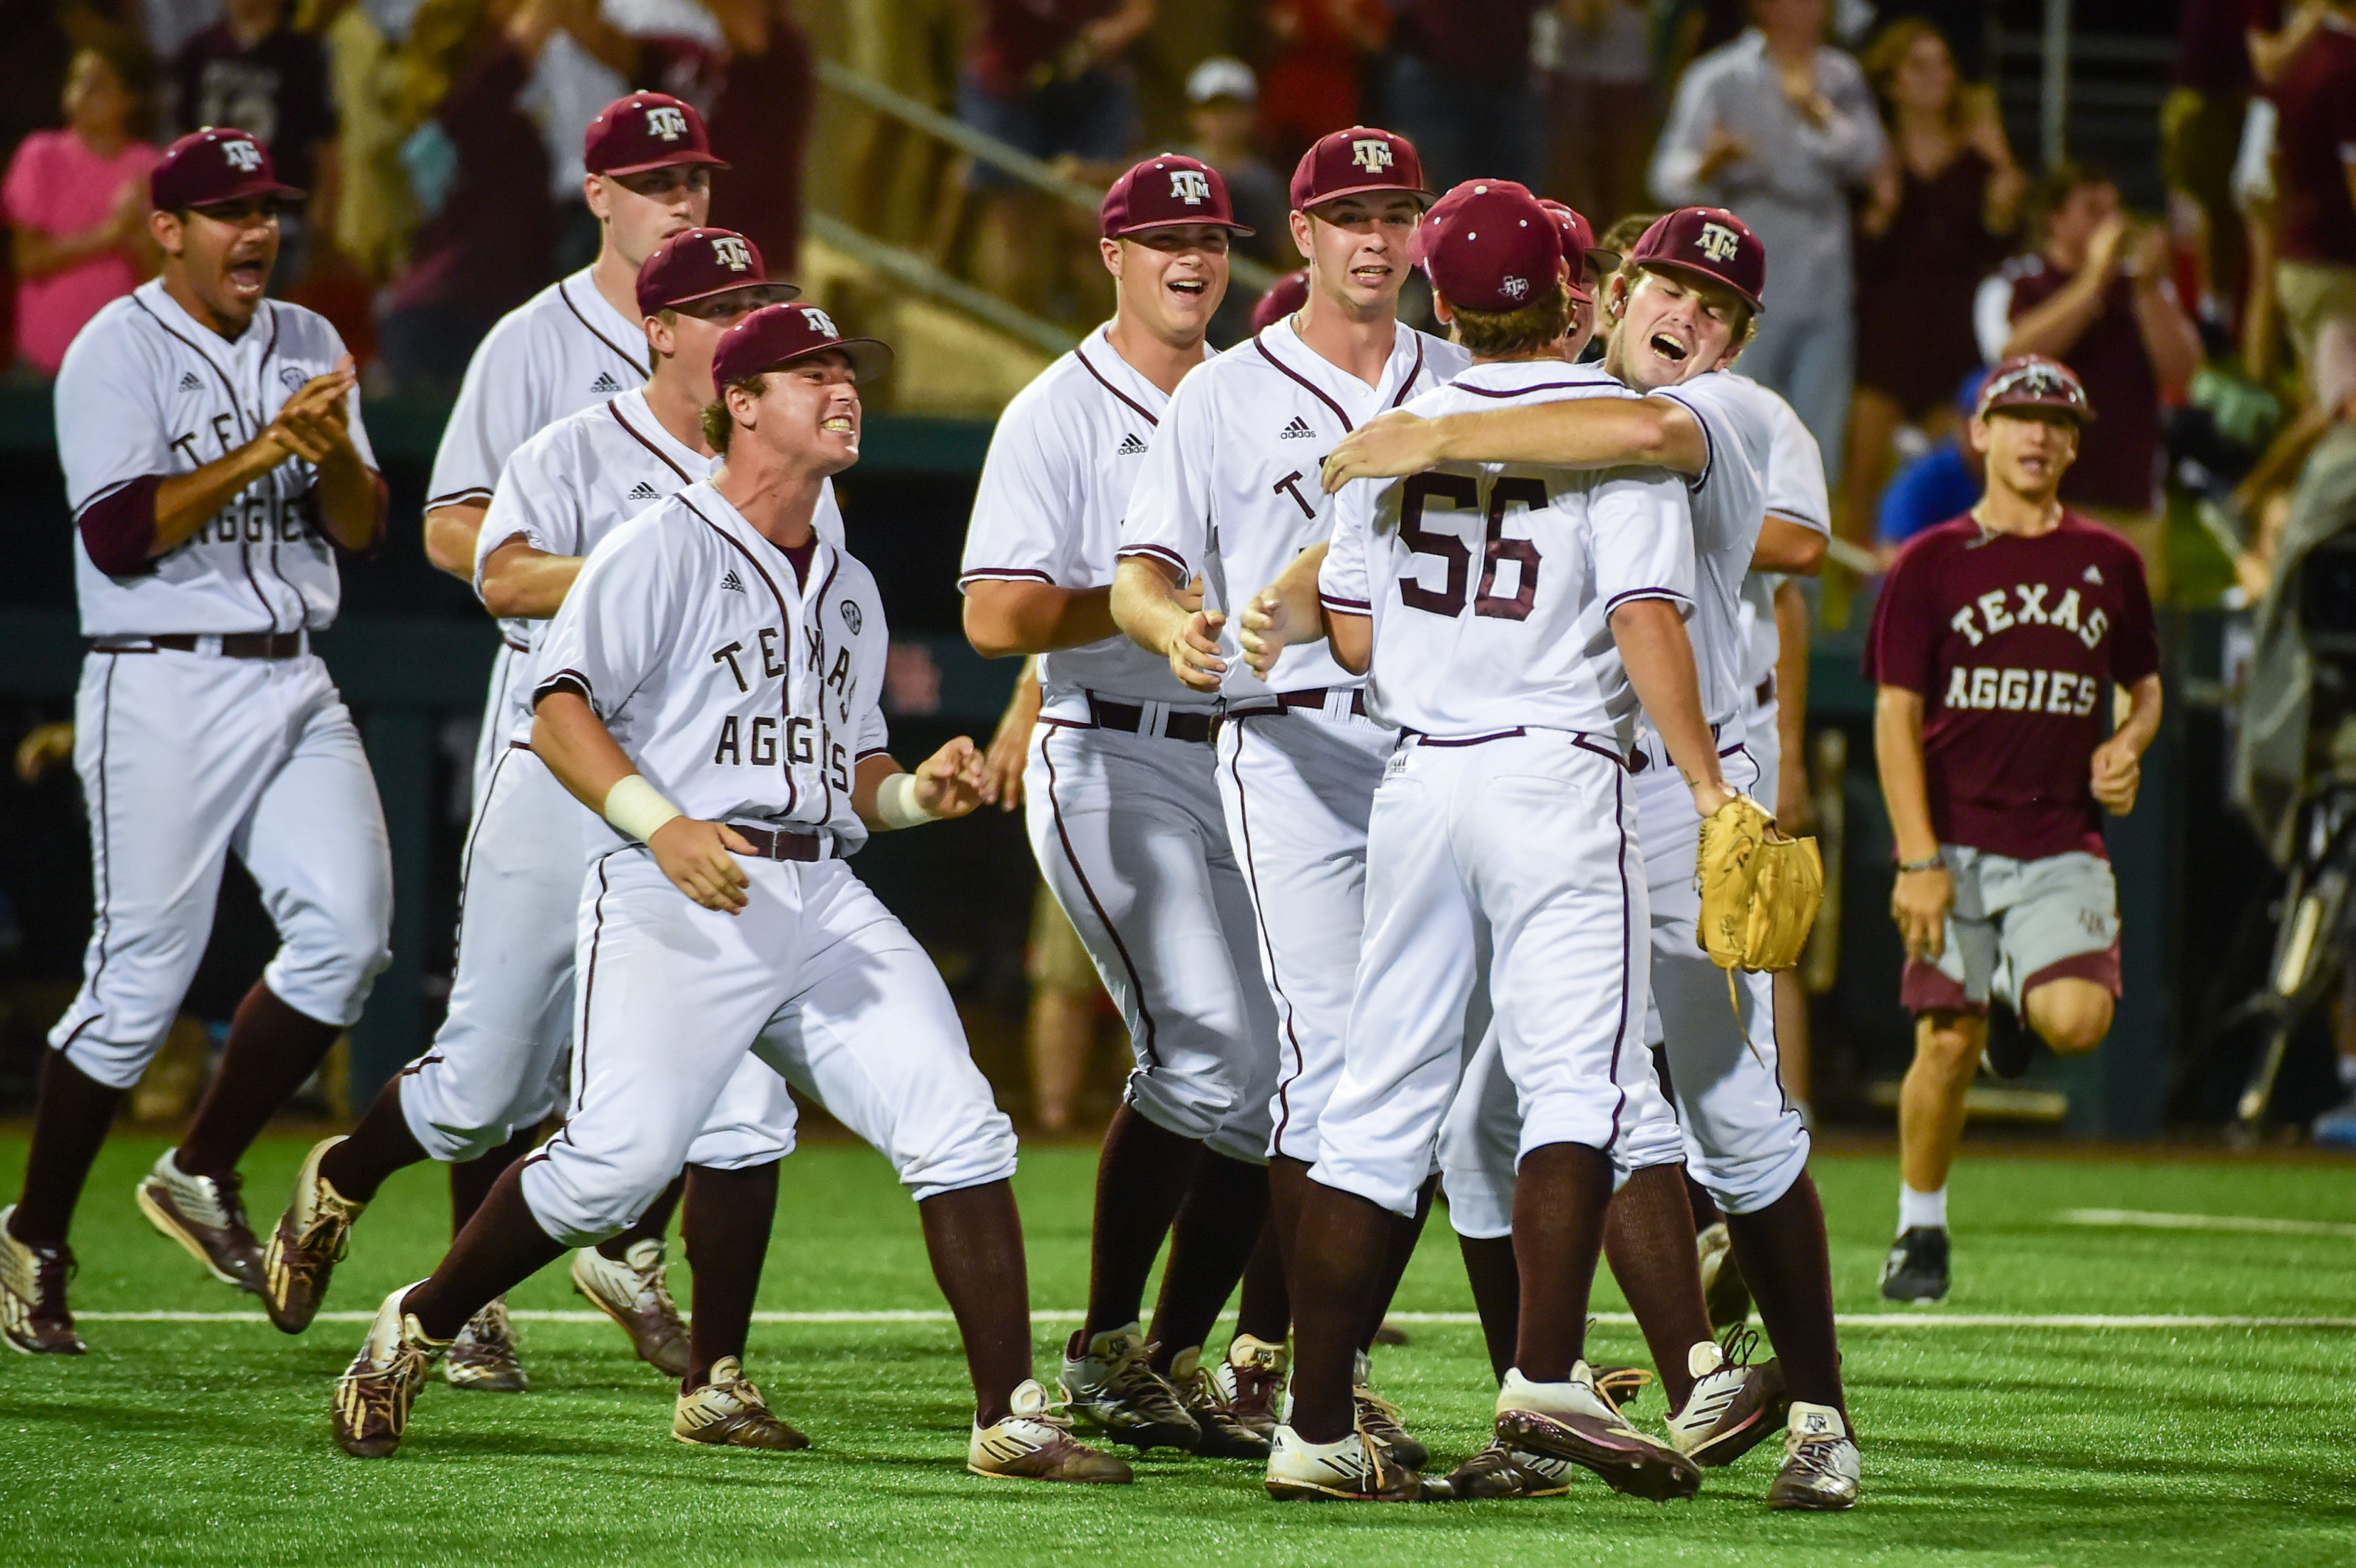 Texas A&M Baseball: 3 Players to Watch for in the 2019 Season